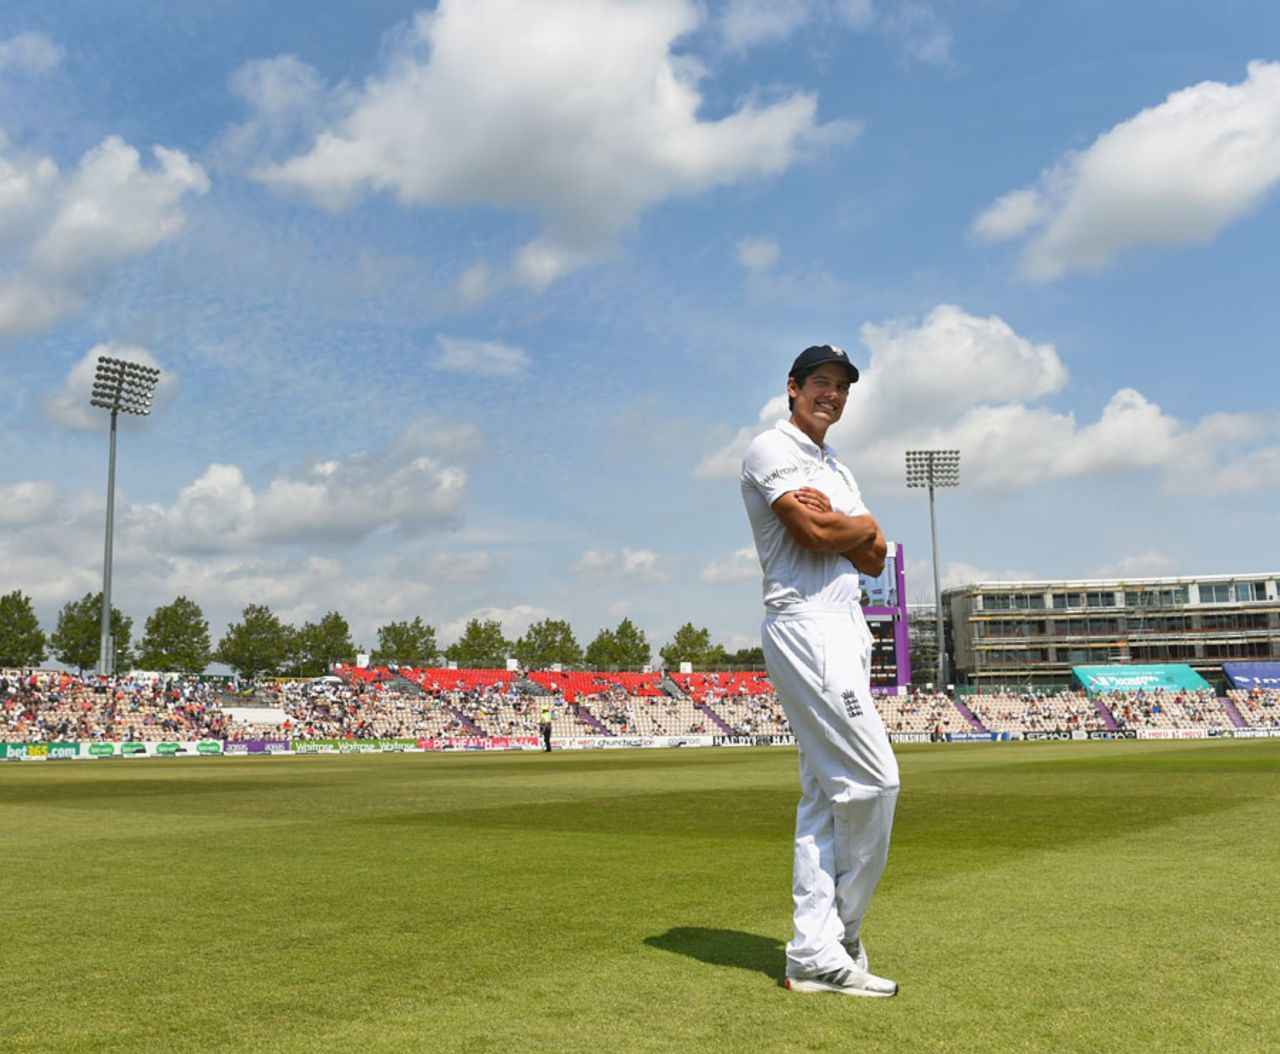 Blue skies ahead? Alastair Cook savours victory, England v India, 3rd Investec Test, Ageas Bowl, 5th day, July 31, 2014